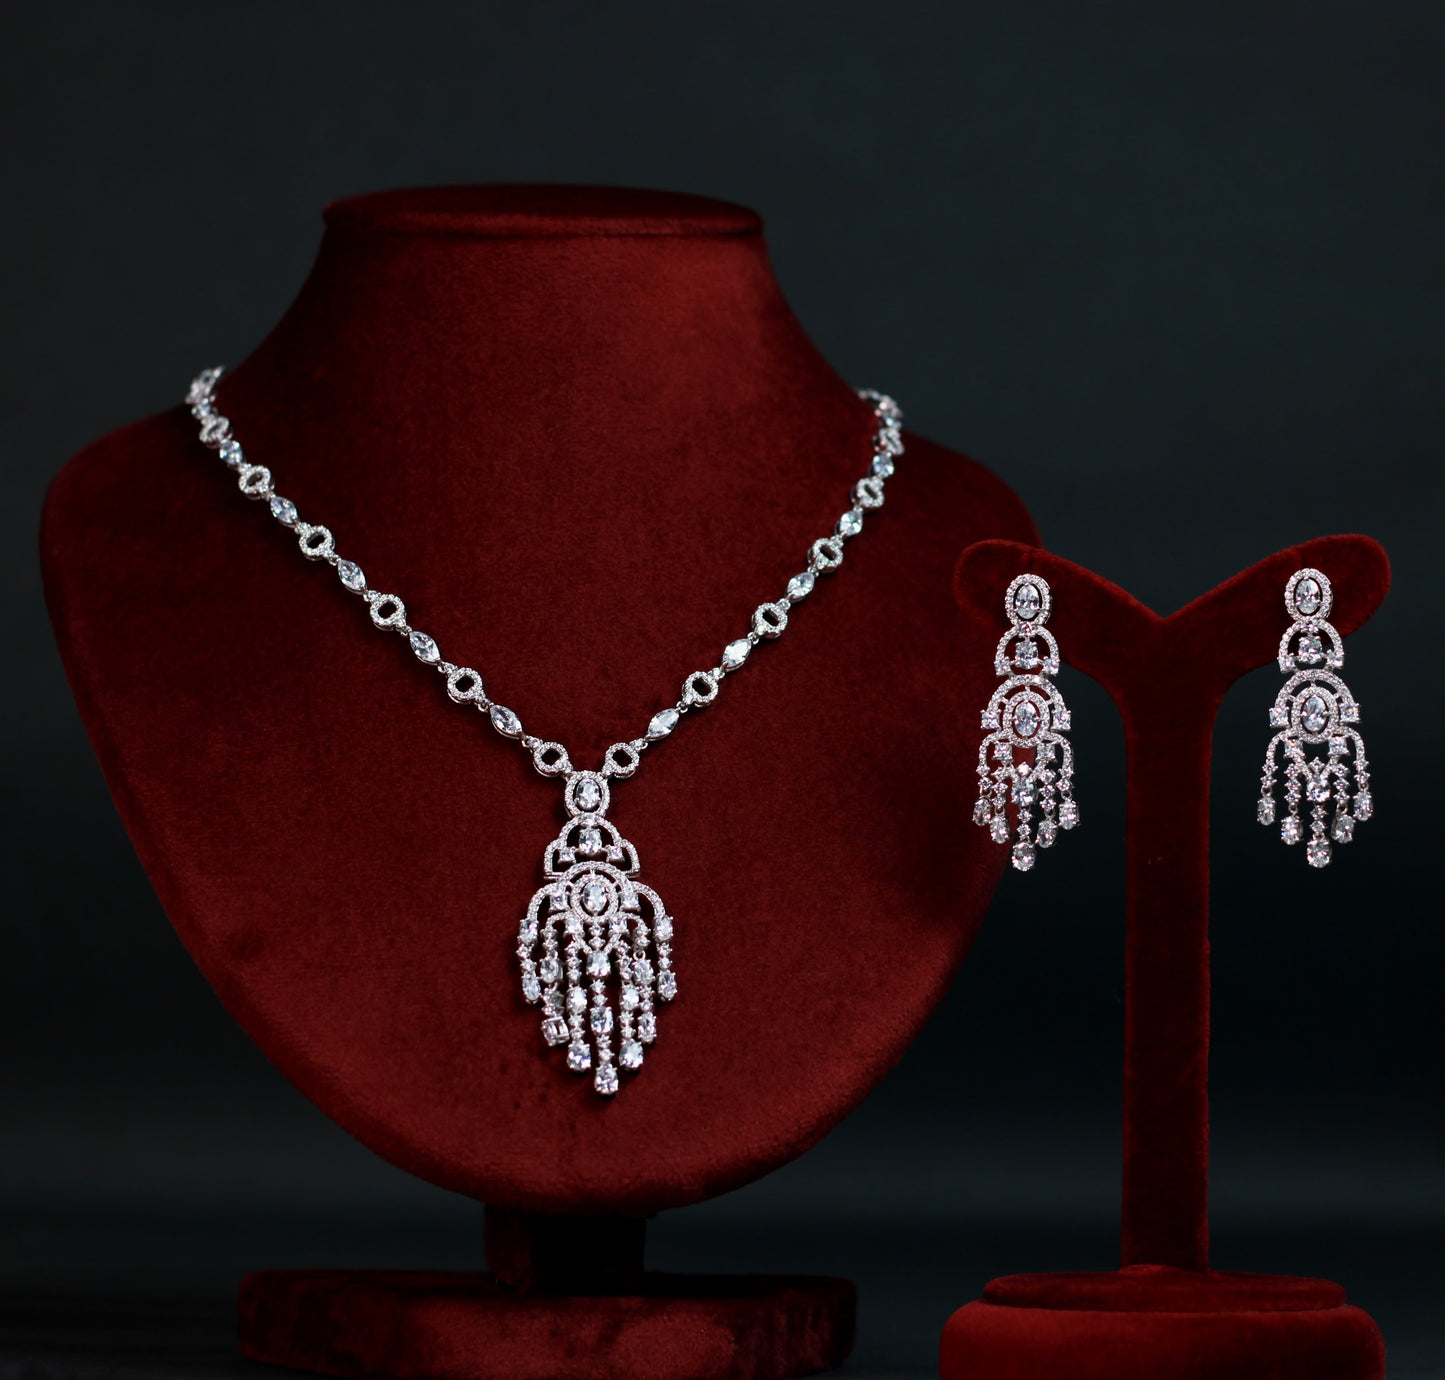 NECKLACE and earring  IN 92.5 STERLING SILVER WITH SWAROVSKI IN WHITE RHODIUM PLATED